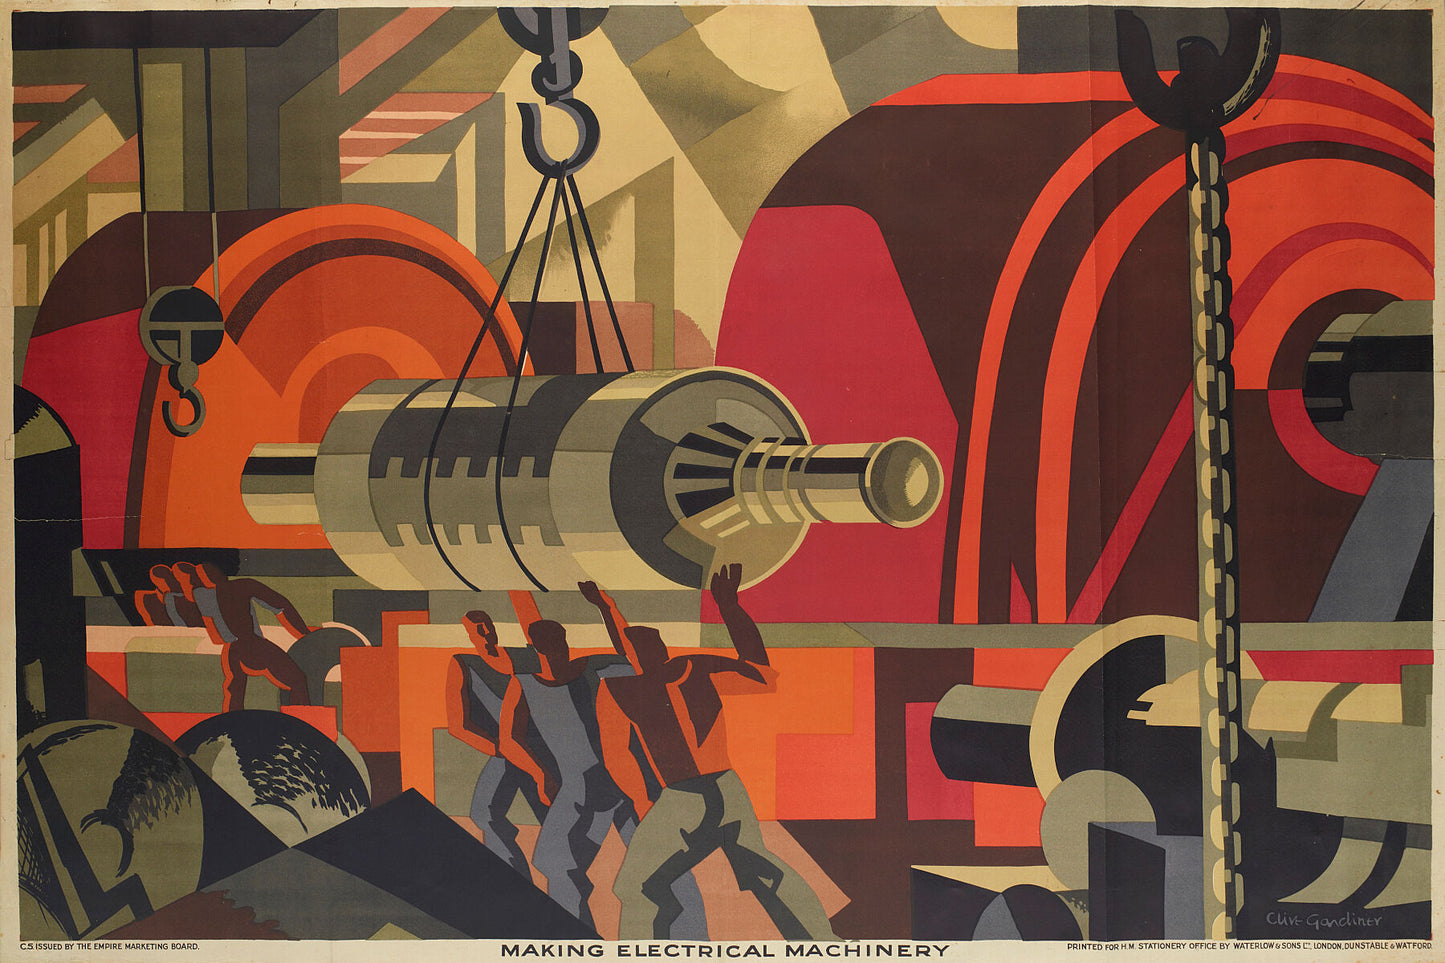 Poster, 'Making Electrical Machinery' ProductionClive Gardiner; artist; 1928; United Kingdom